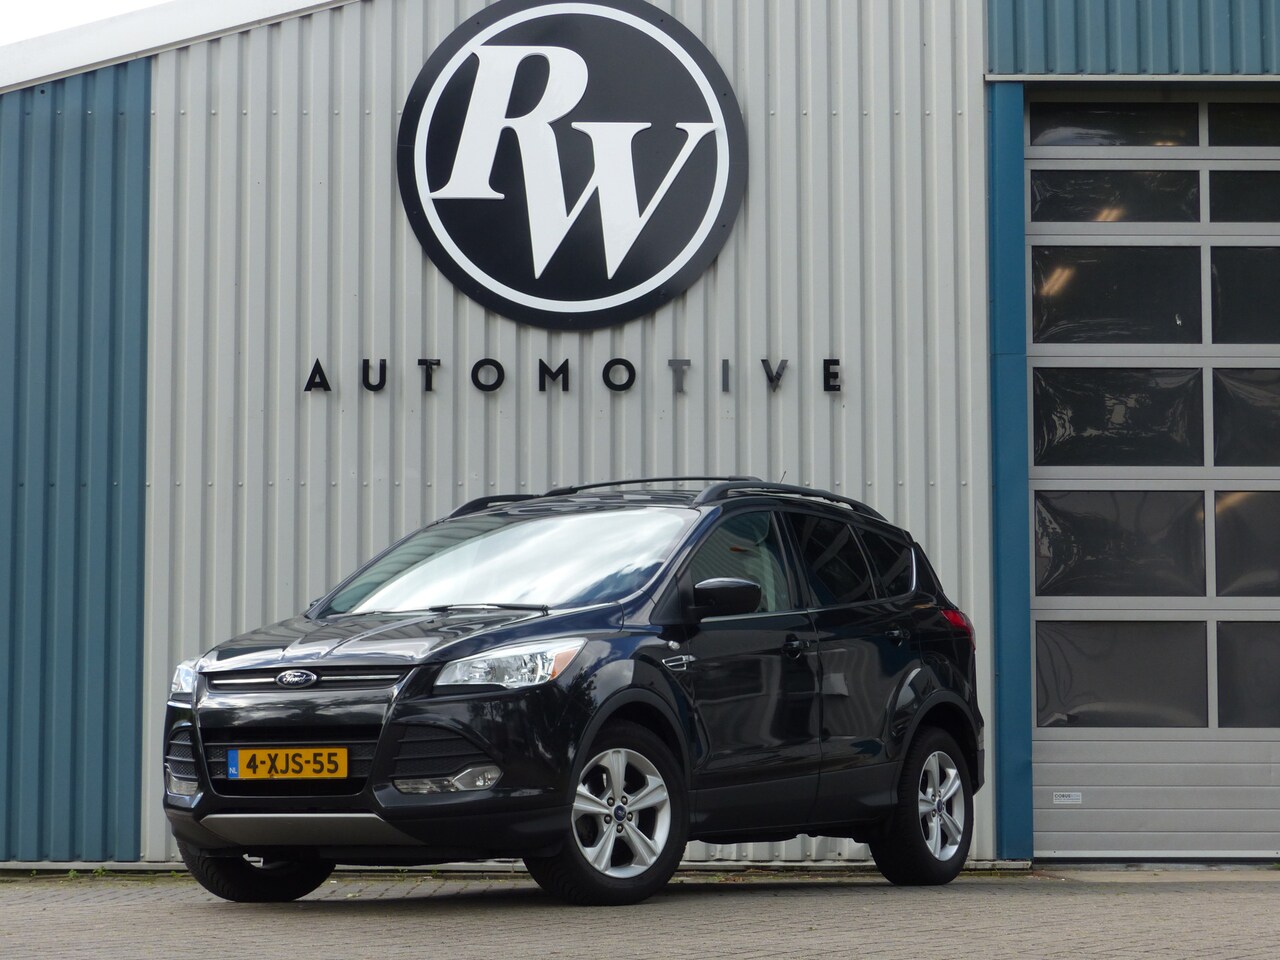 Ford Kuga - Escape SE 1.6 177PK Automaat/Nw model/ Cruise/Bluetooth/Audio - AutoWereld.nl